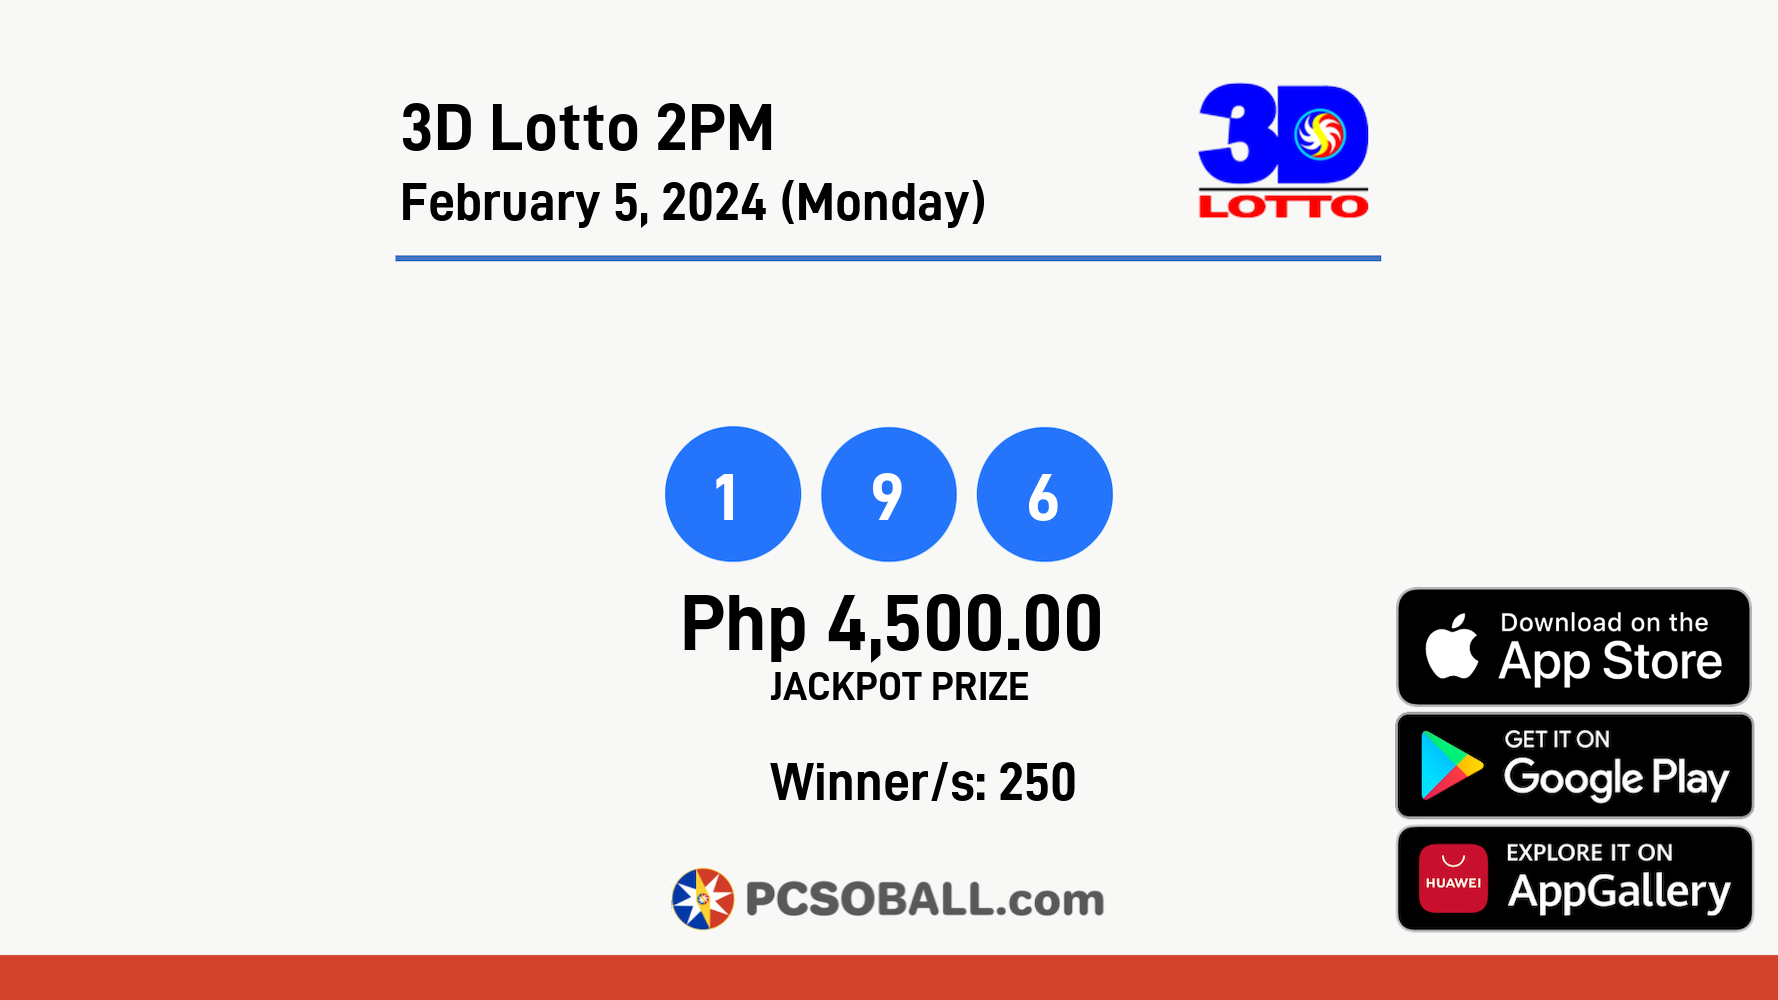 3D Lotto 2PM February 5, 2024 (Monday) Result